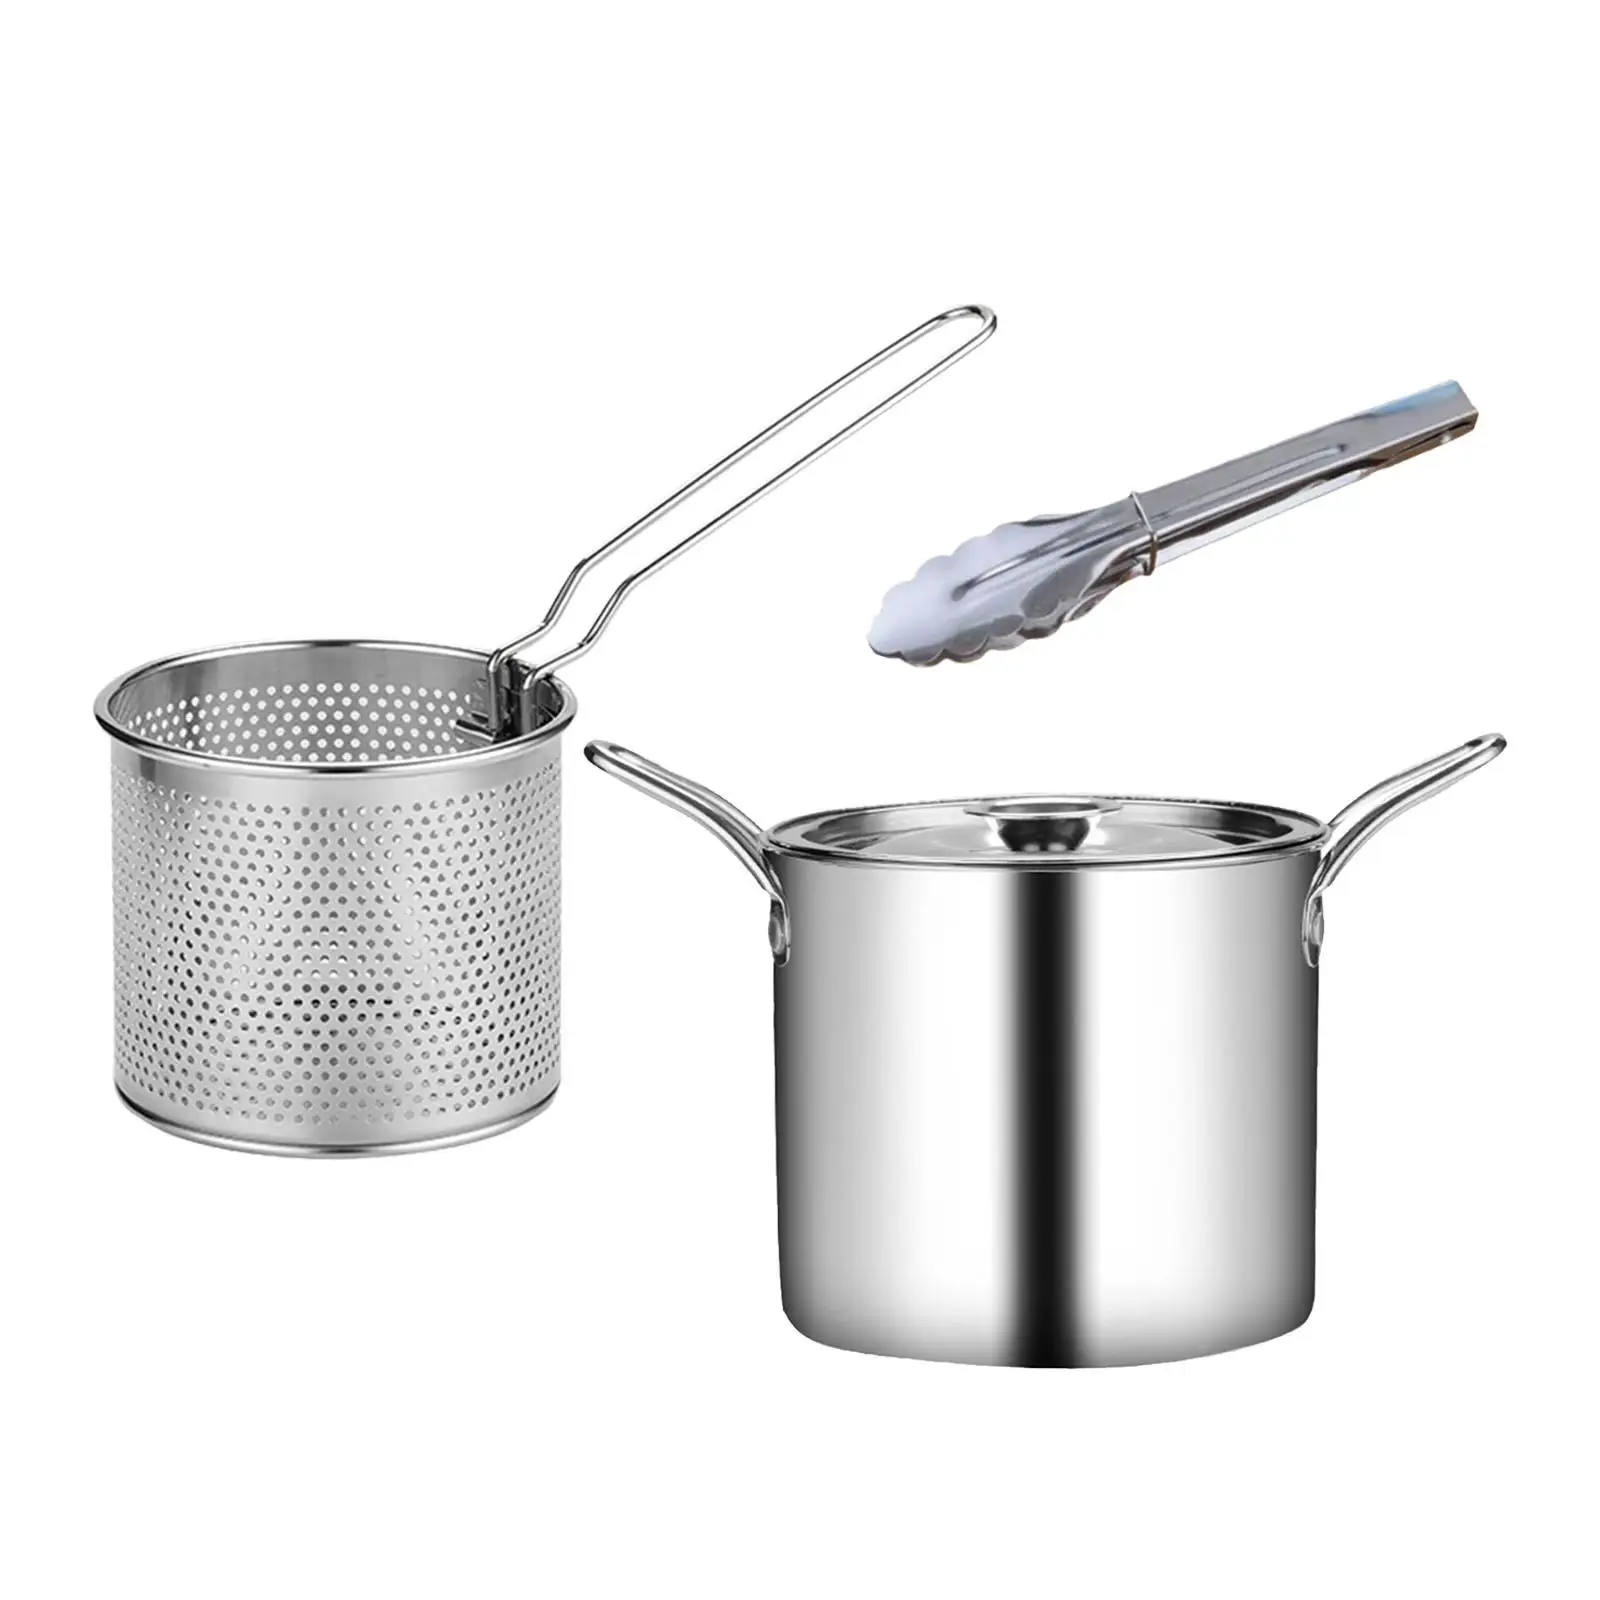 Deep Fryer Pot Kitchenware Cooking Tool Kitchen Noodles Pot Cooking Pot Frying Basket for Party Camping Home Picnic Dining Room